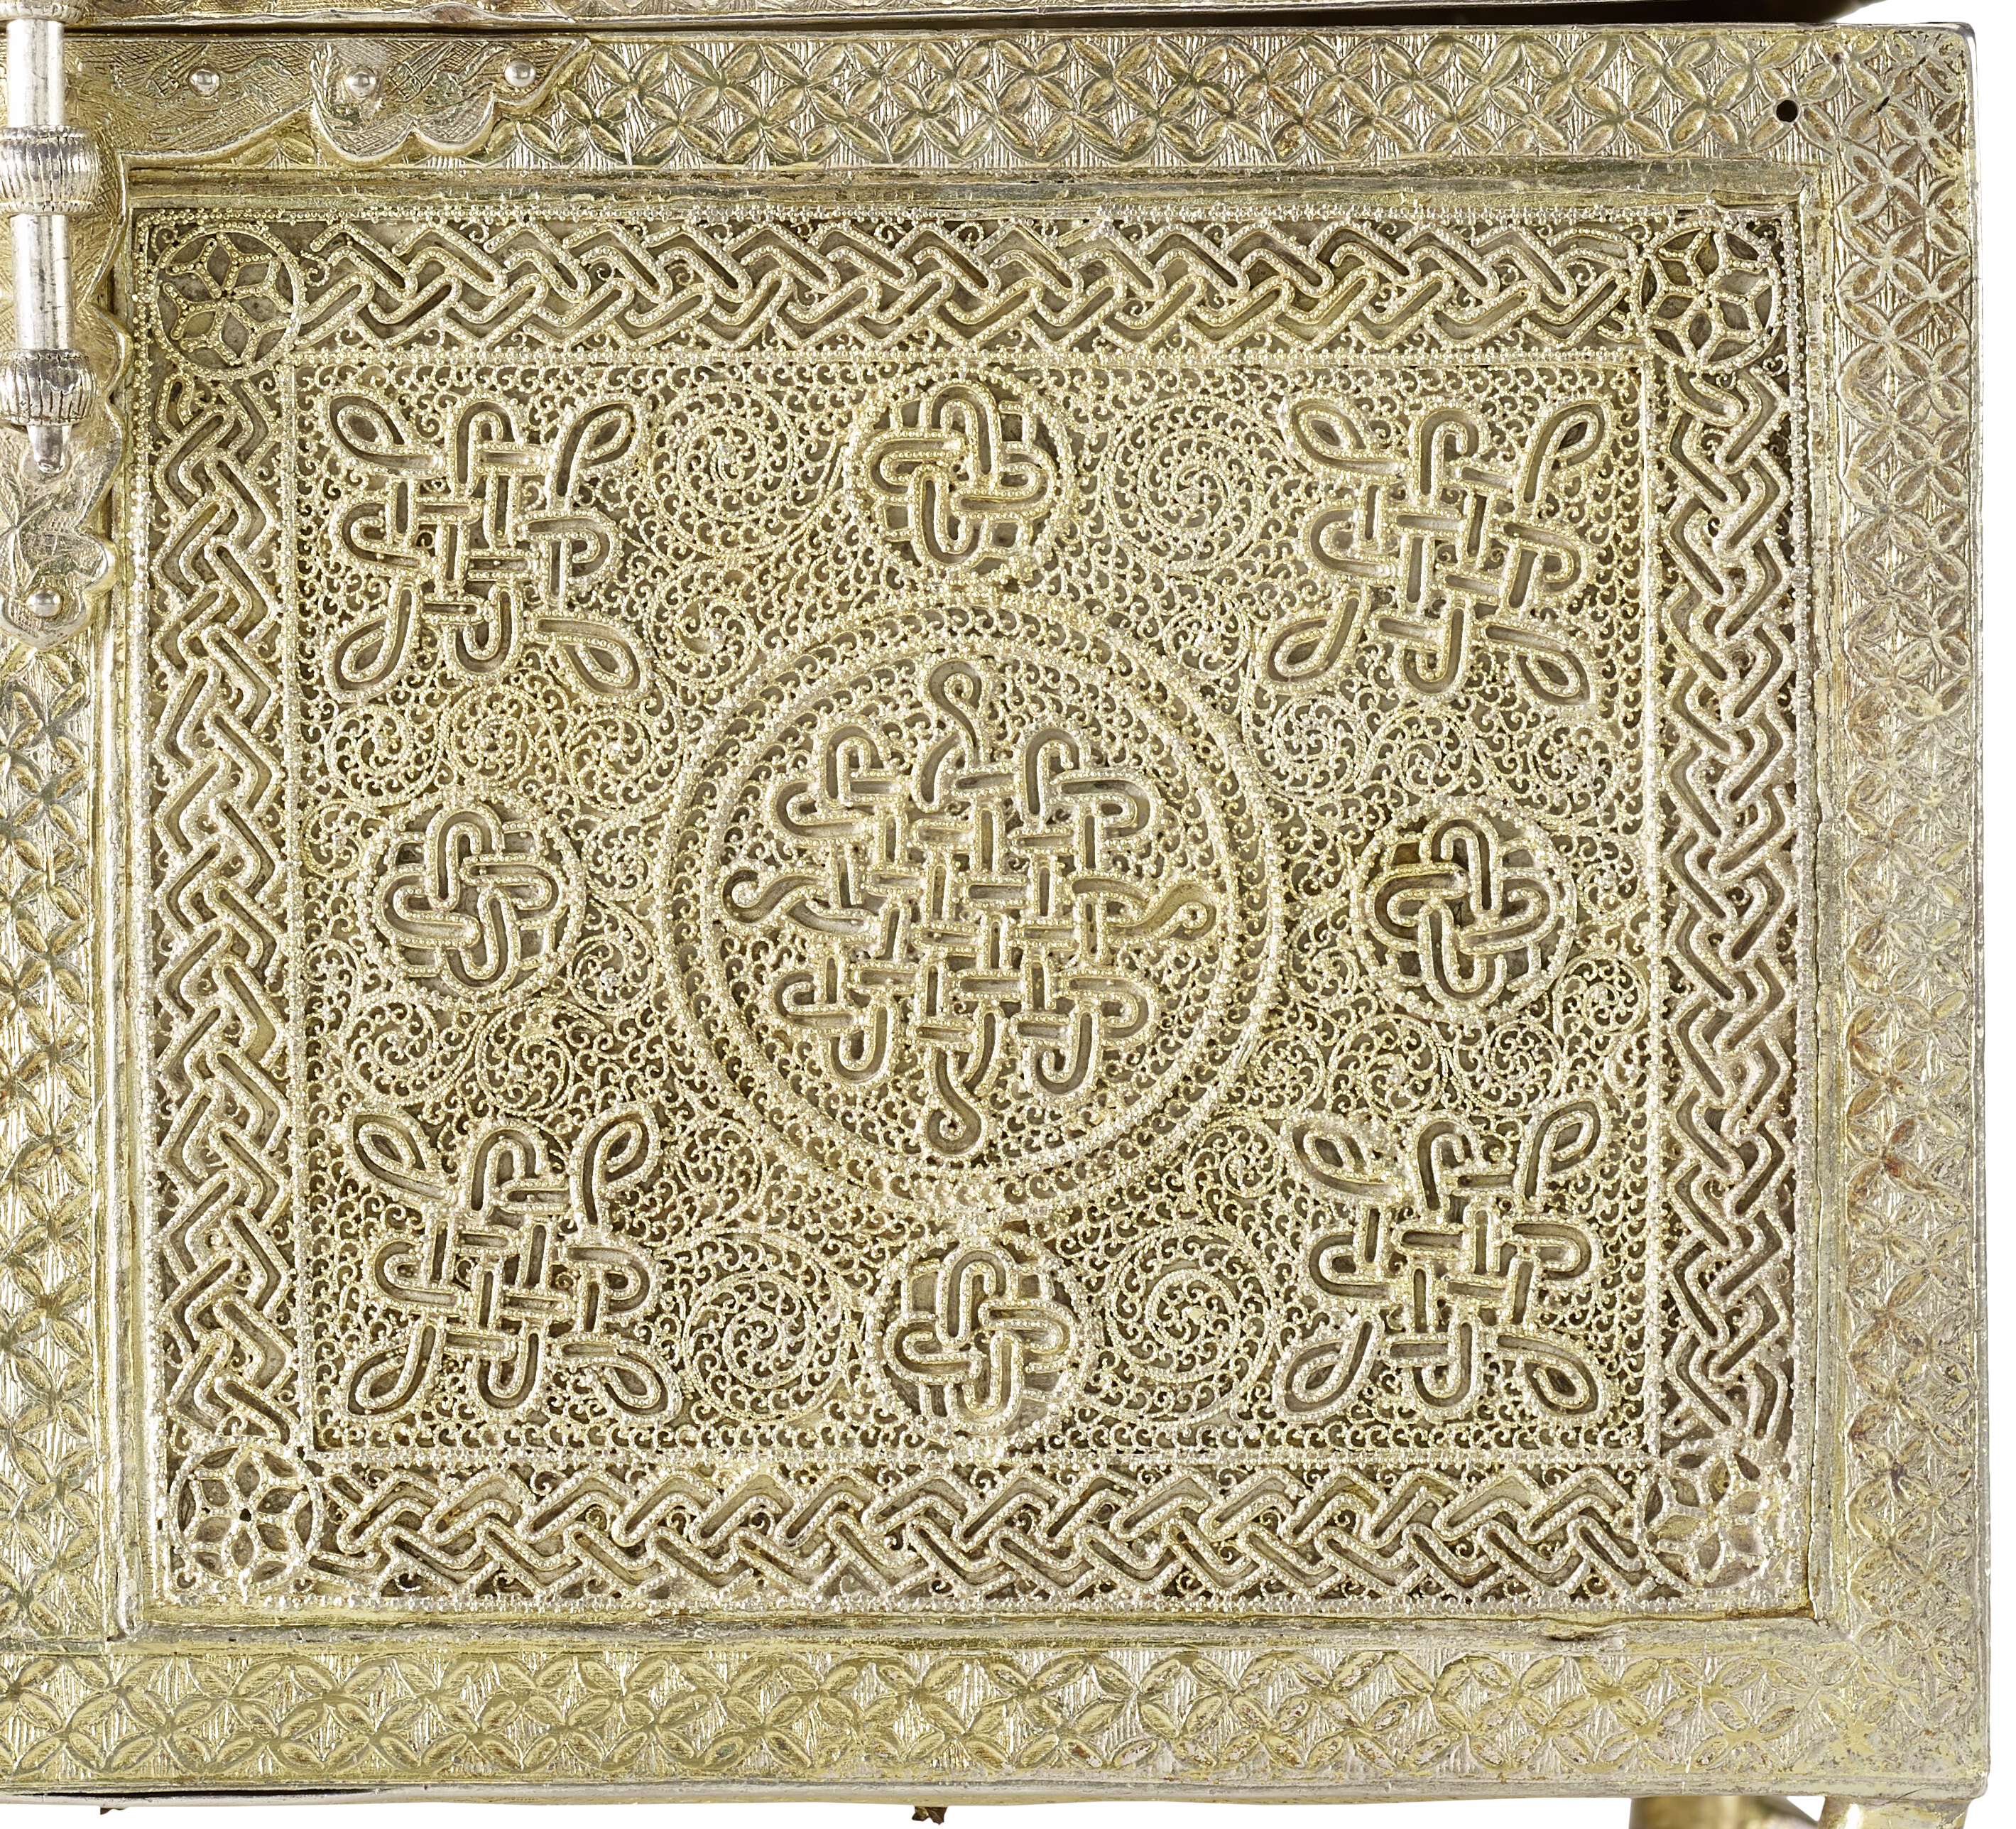 Silver casket: plate set into the frame with central medallion and knot motifs. Frame with punched lanceolate petals.